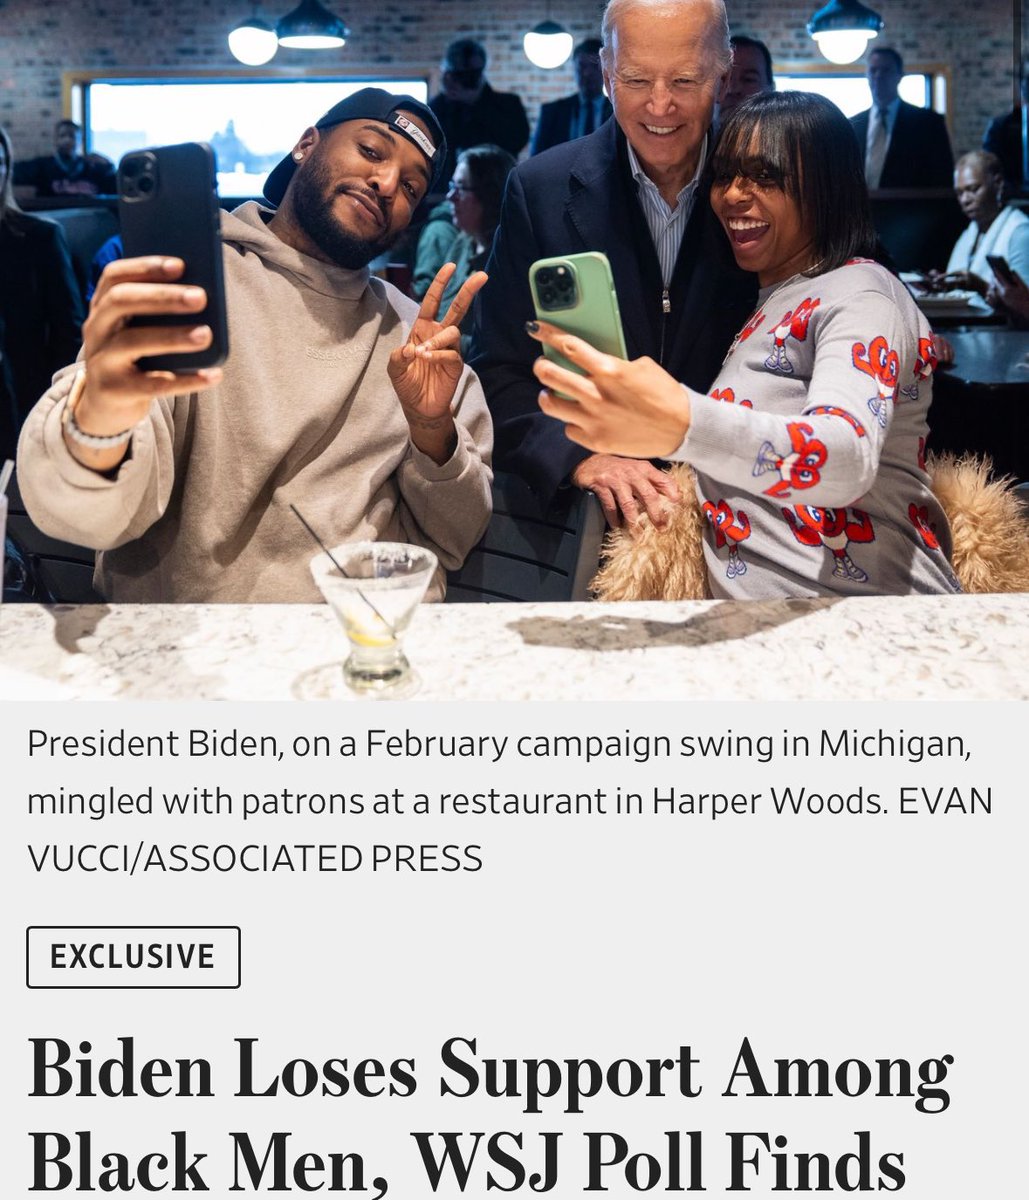 Stunning article from WSJ! According to their polling in 7 battleground States, 30% of black men and 11% of black women, intend to vote for Trump in 2024. In 2020, Trump won 12% of the black male vote, and 6% of the black female vote. These are CATASTROPHIC numbers for Biden.